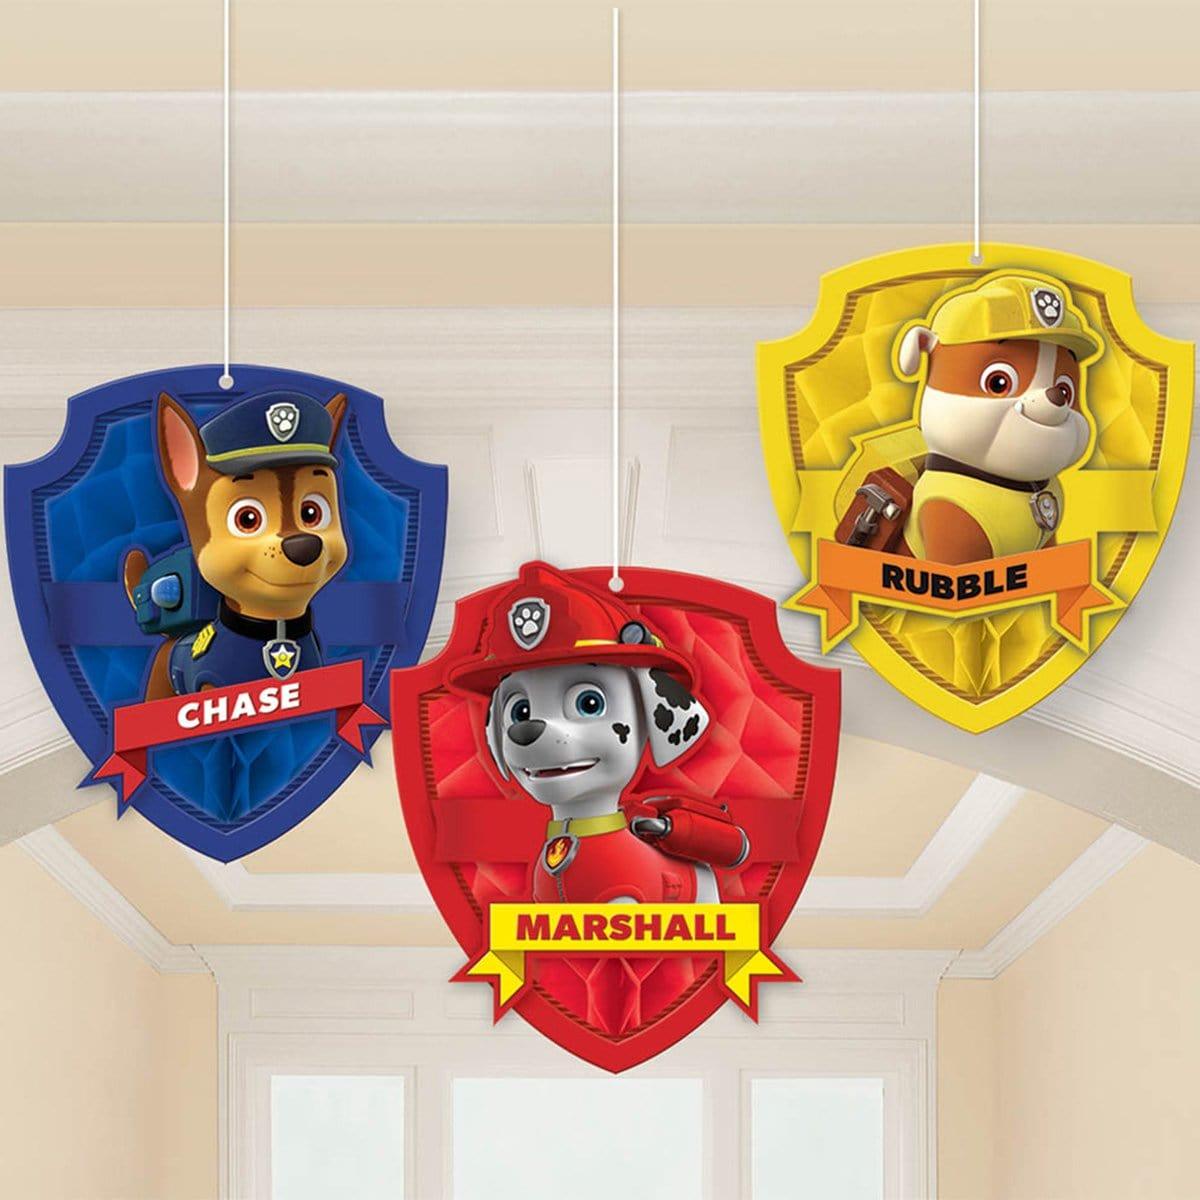 Buy Kids Birthday Paw Patrol honeycomb decorations, 3 per package sold at Party Expert